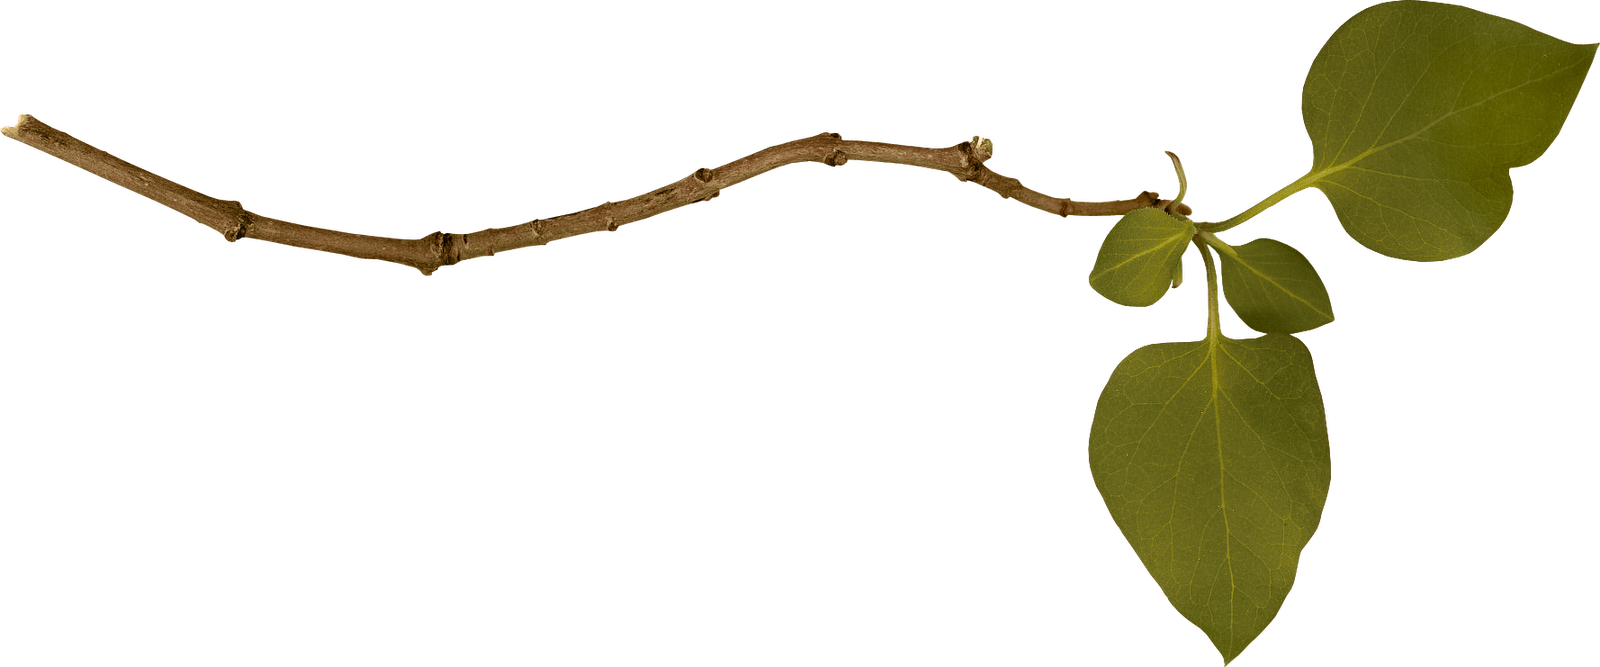 Branch PNG Transparent Images | PNG All